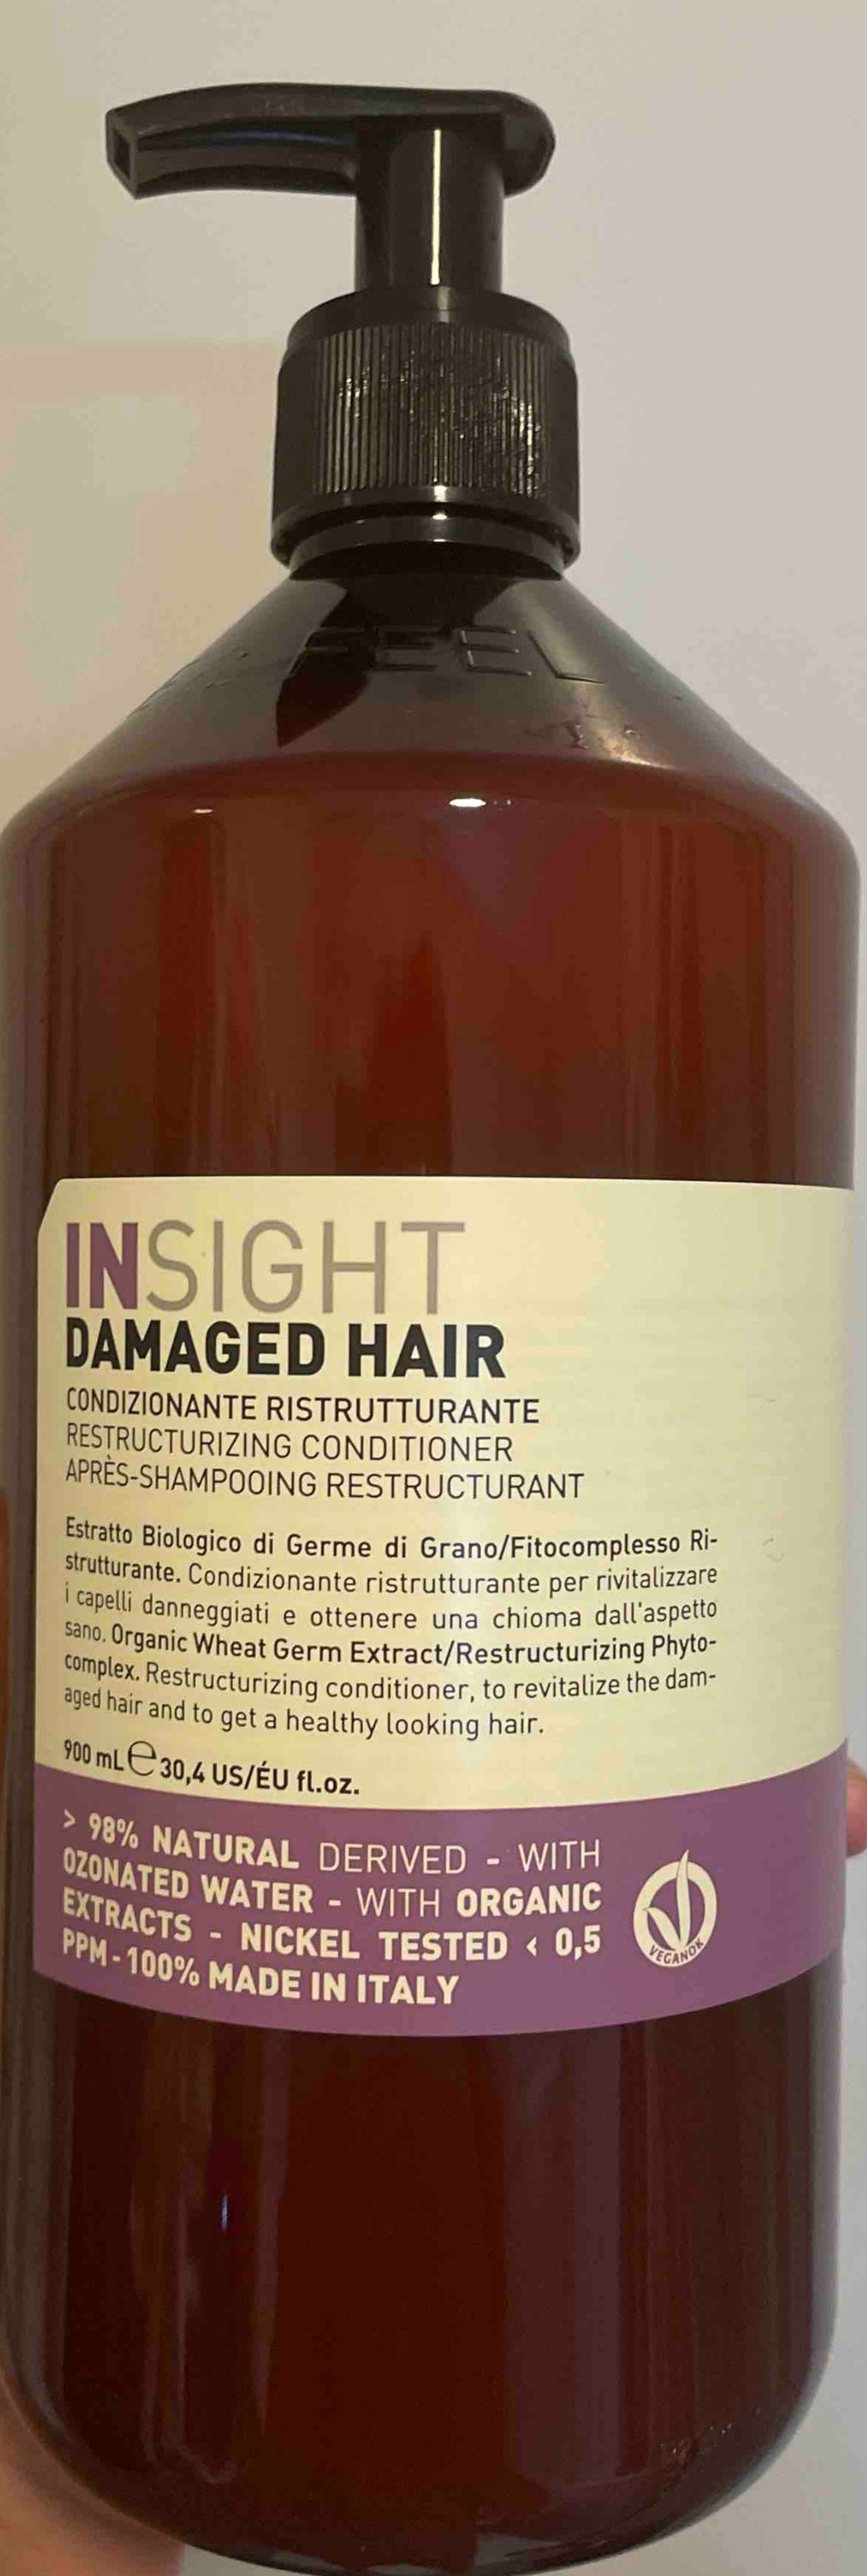 INSIGHT - Après-shampooing restructurant